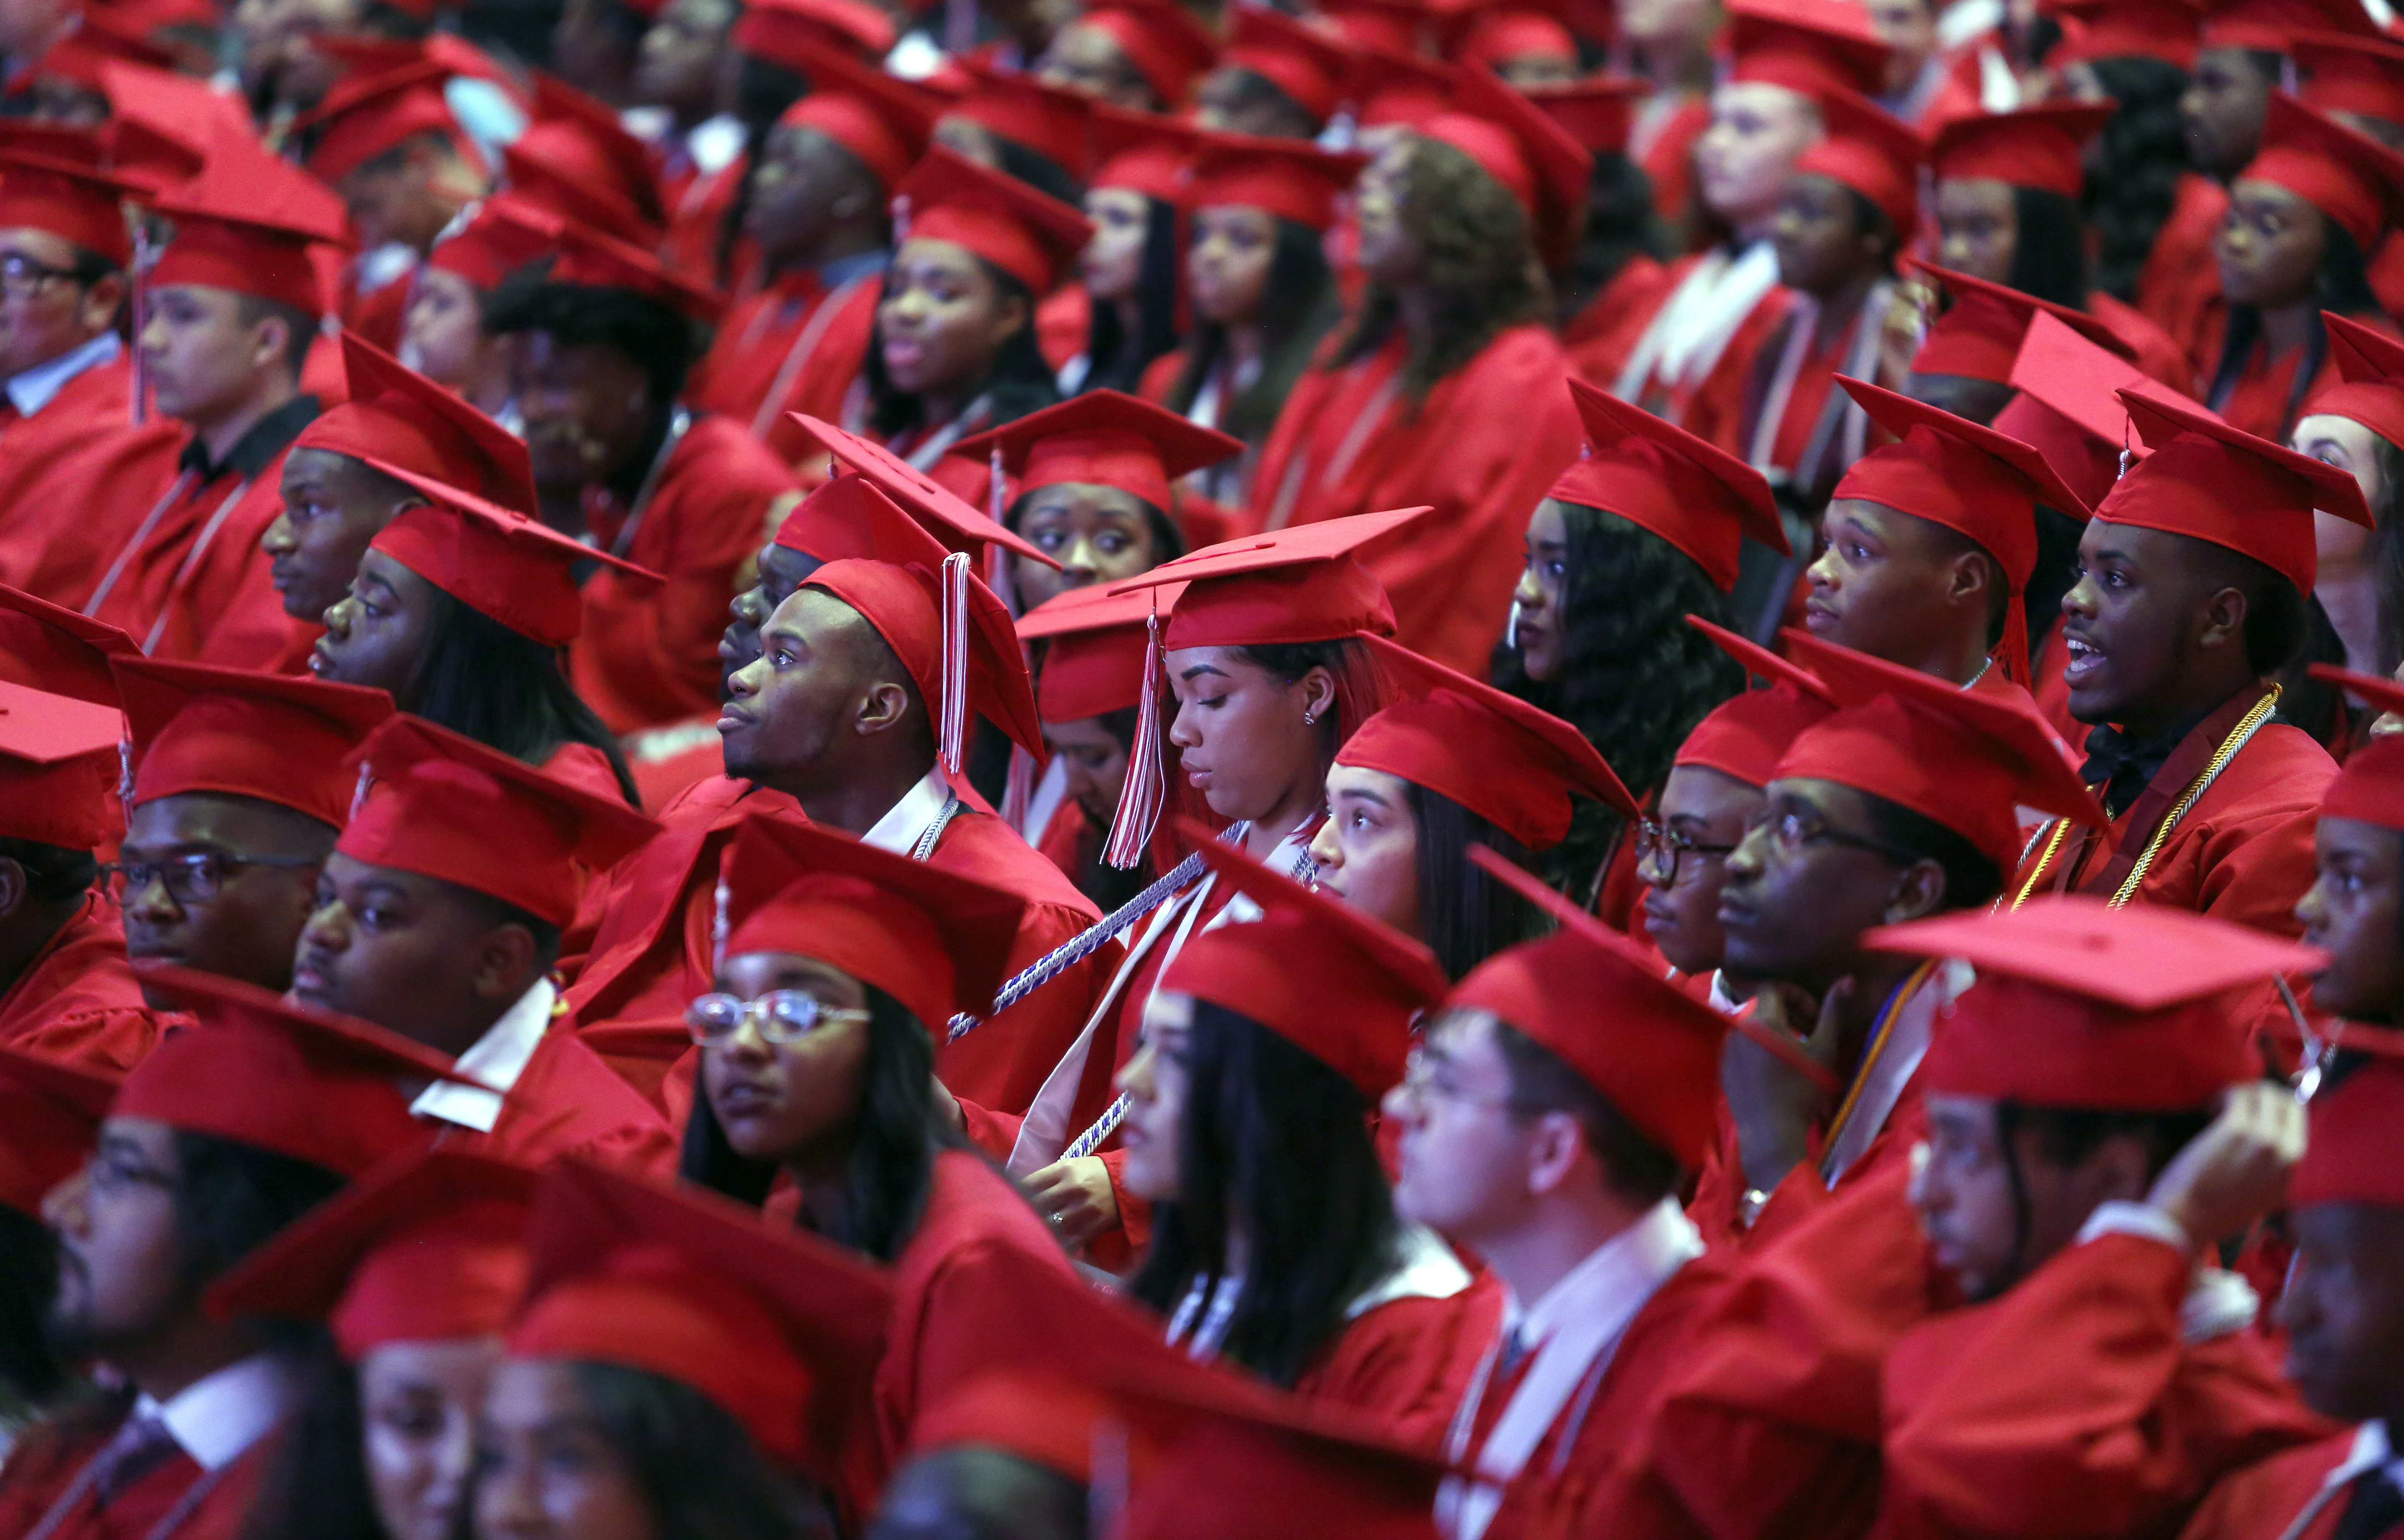 Surrounded by other graduates, Phantasia Chavers (center), adjusts her honor cords during her graduation from Cedar Hill High School at College Park Center in Arlington on Friday, May 26, 2017. (photo © Lara Solt)